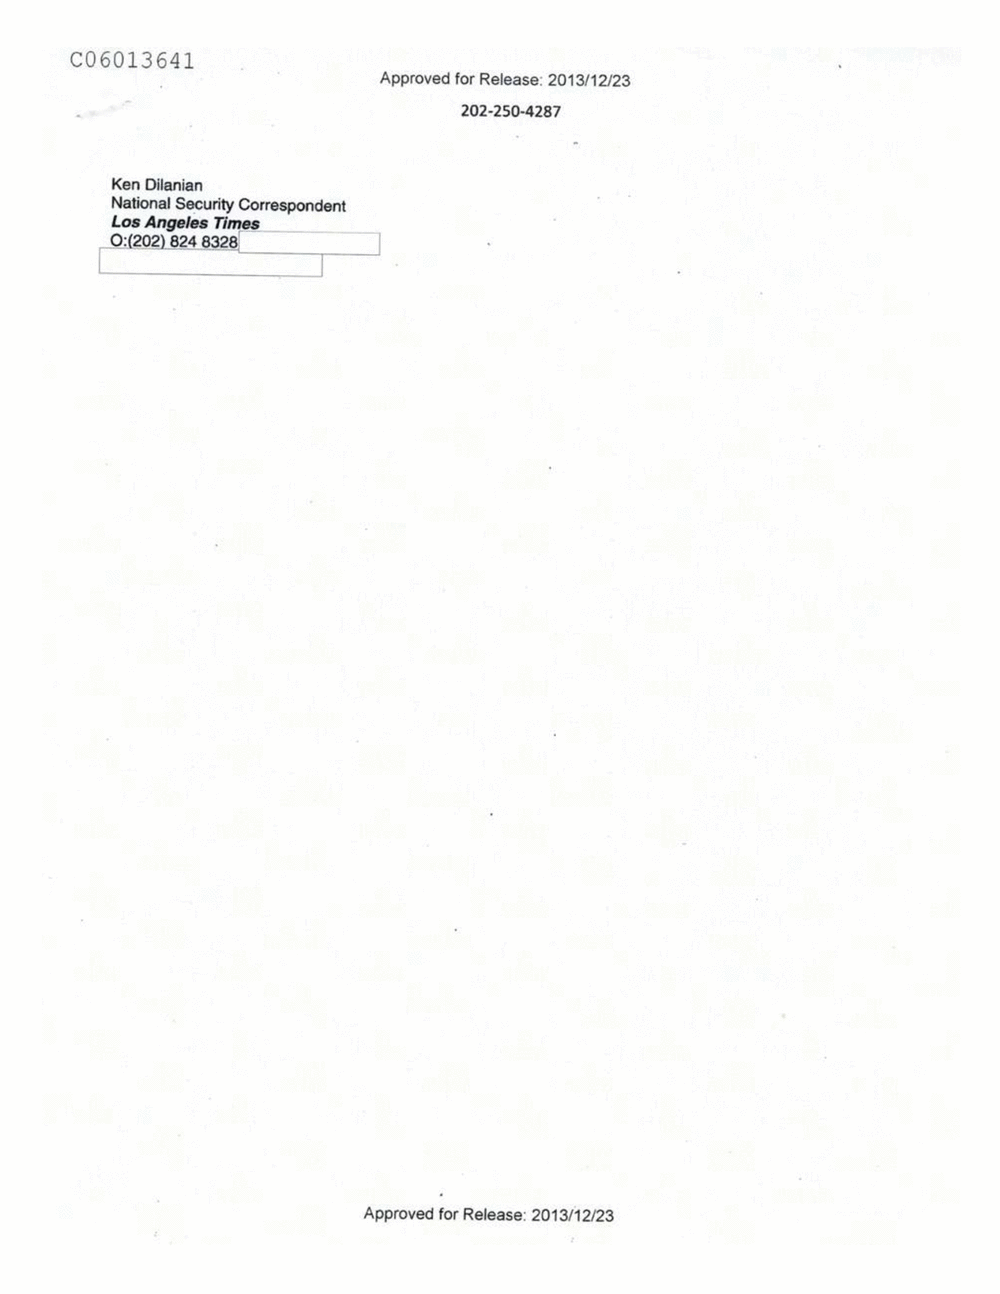 Page 482 from Email Correspondence Between Reporters and CIA Flacks